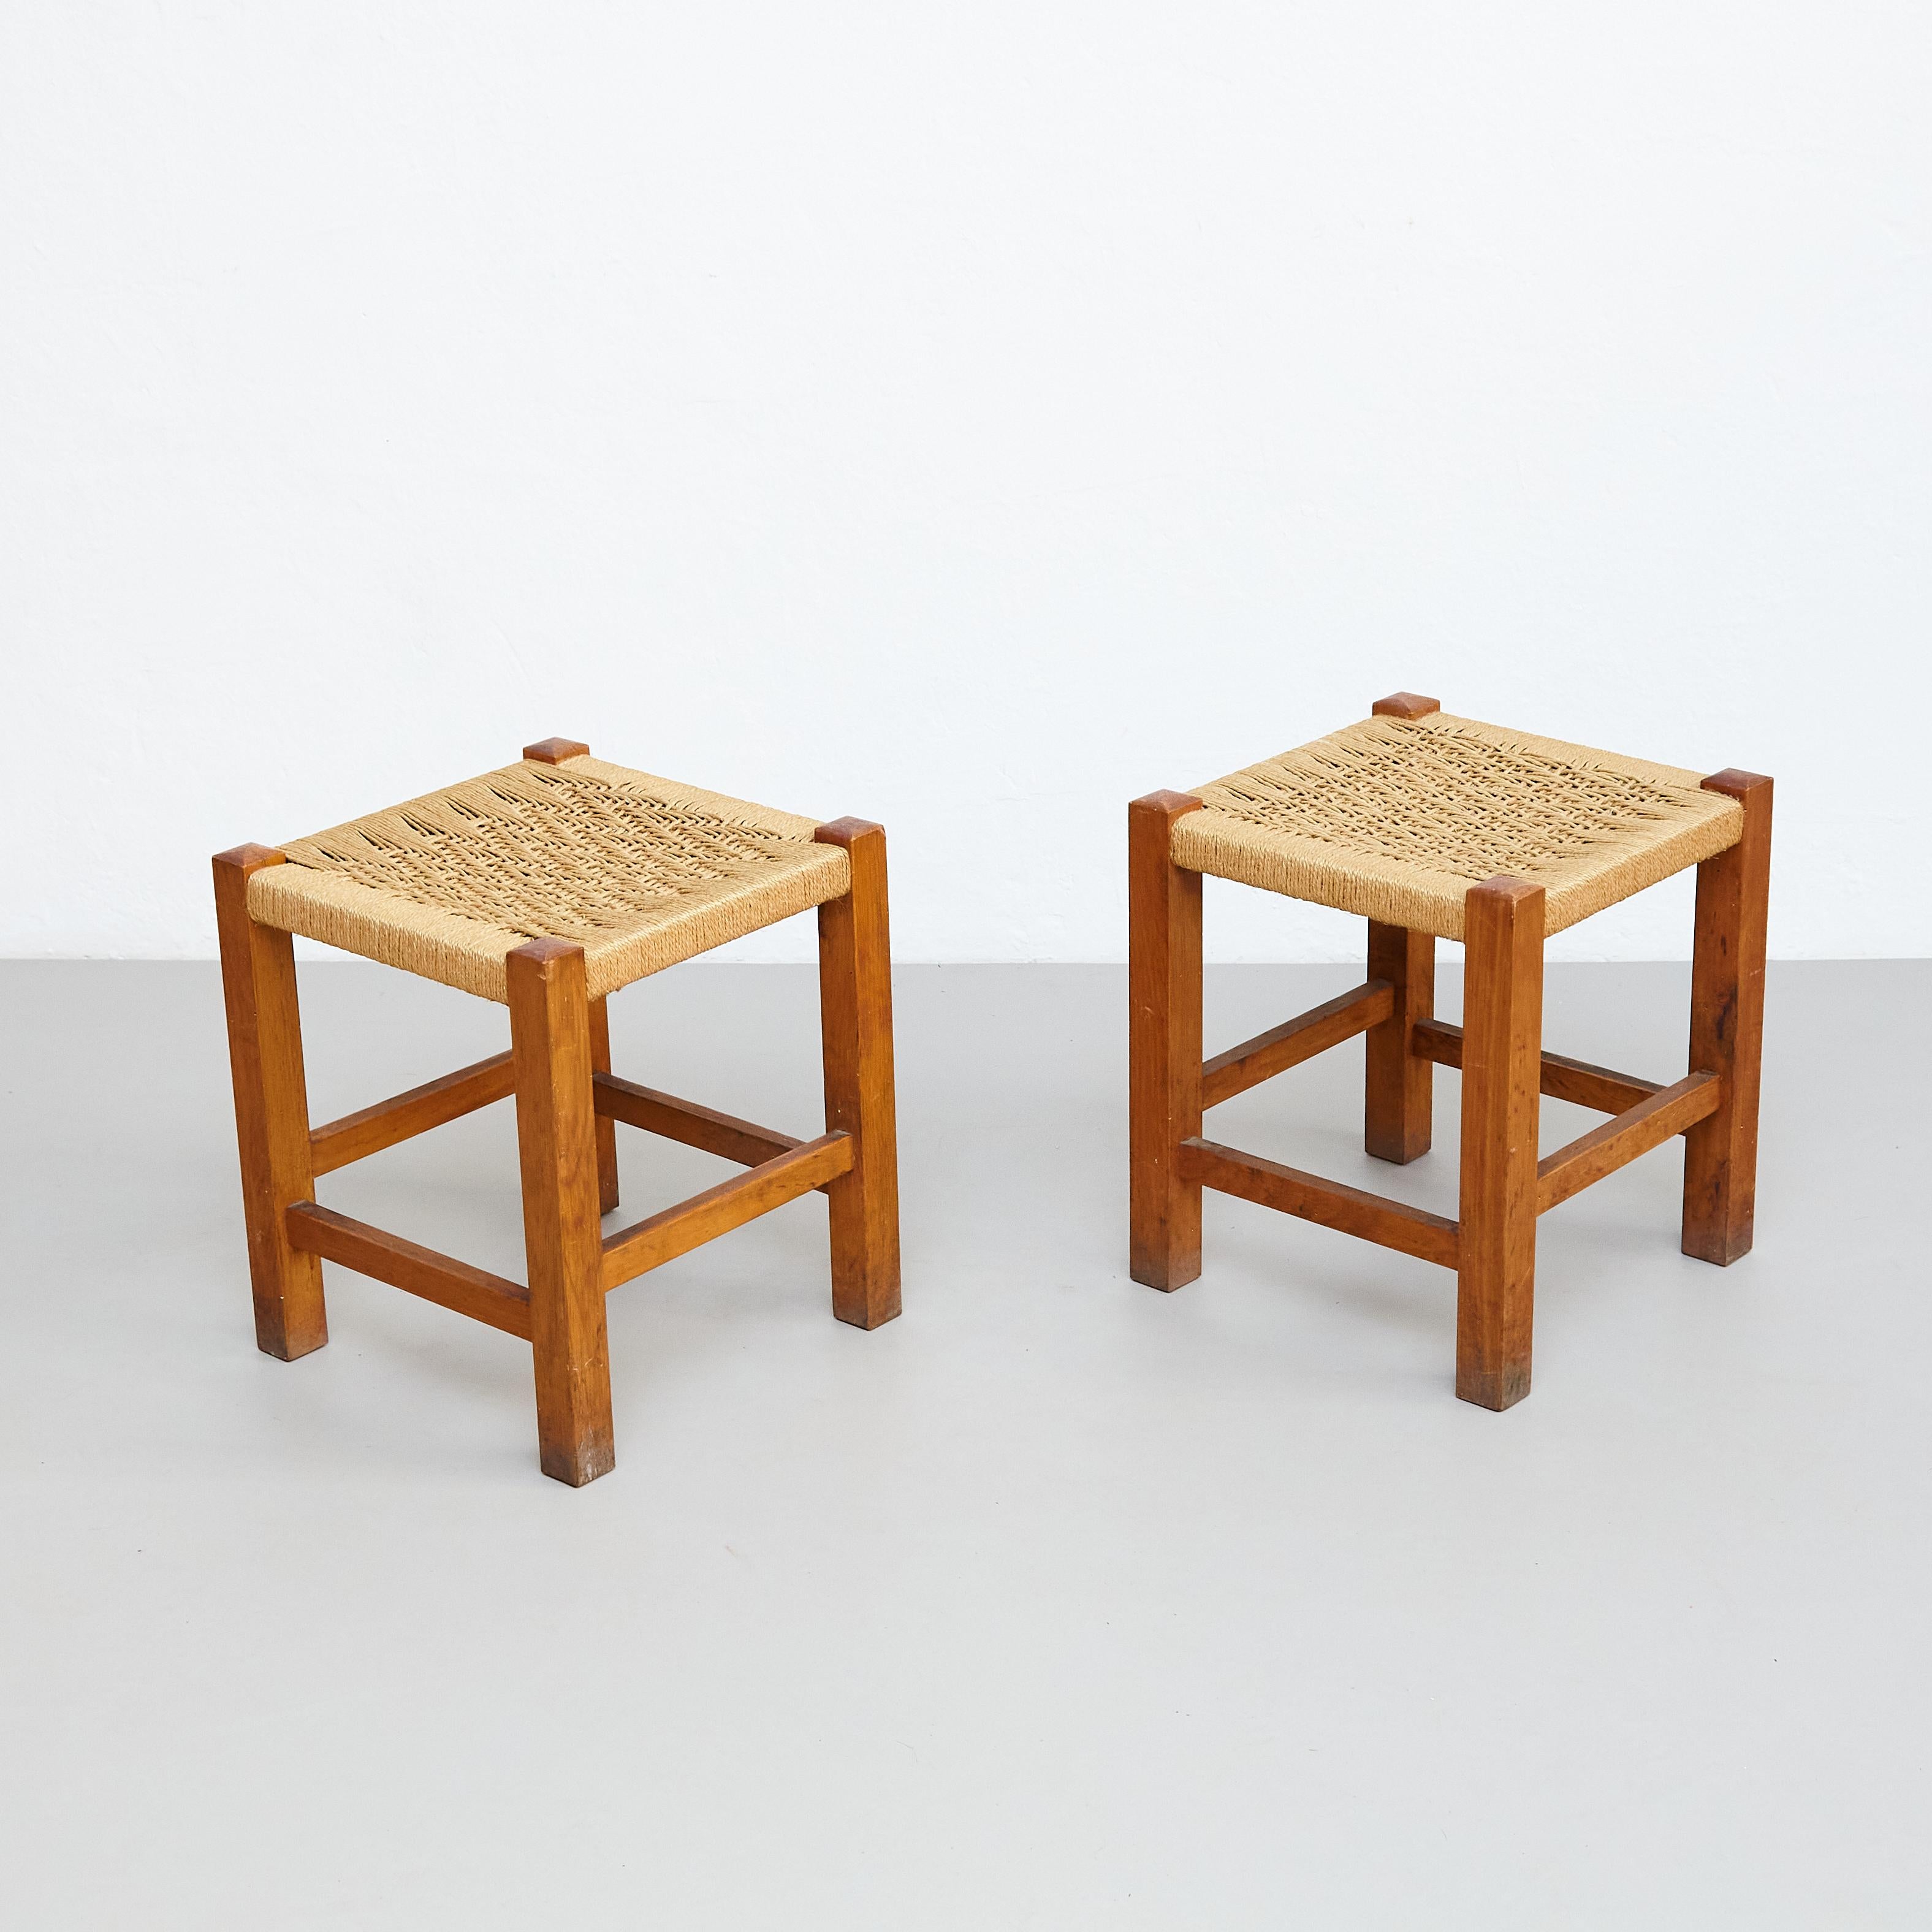 Pair of Mid-Century Modern Wood and Rattan French Stools, circa 1960 In Good Condition For Sale In Barcelona, Barcelona